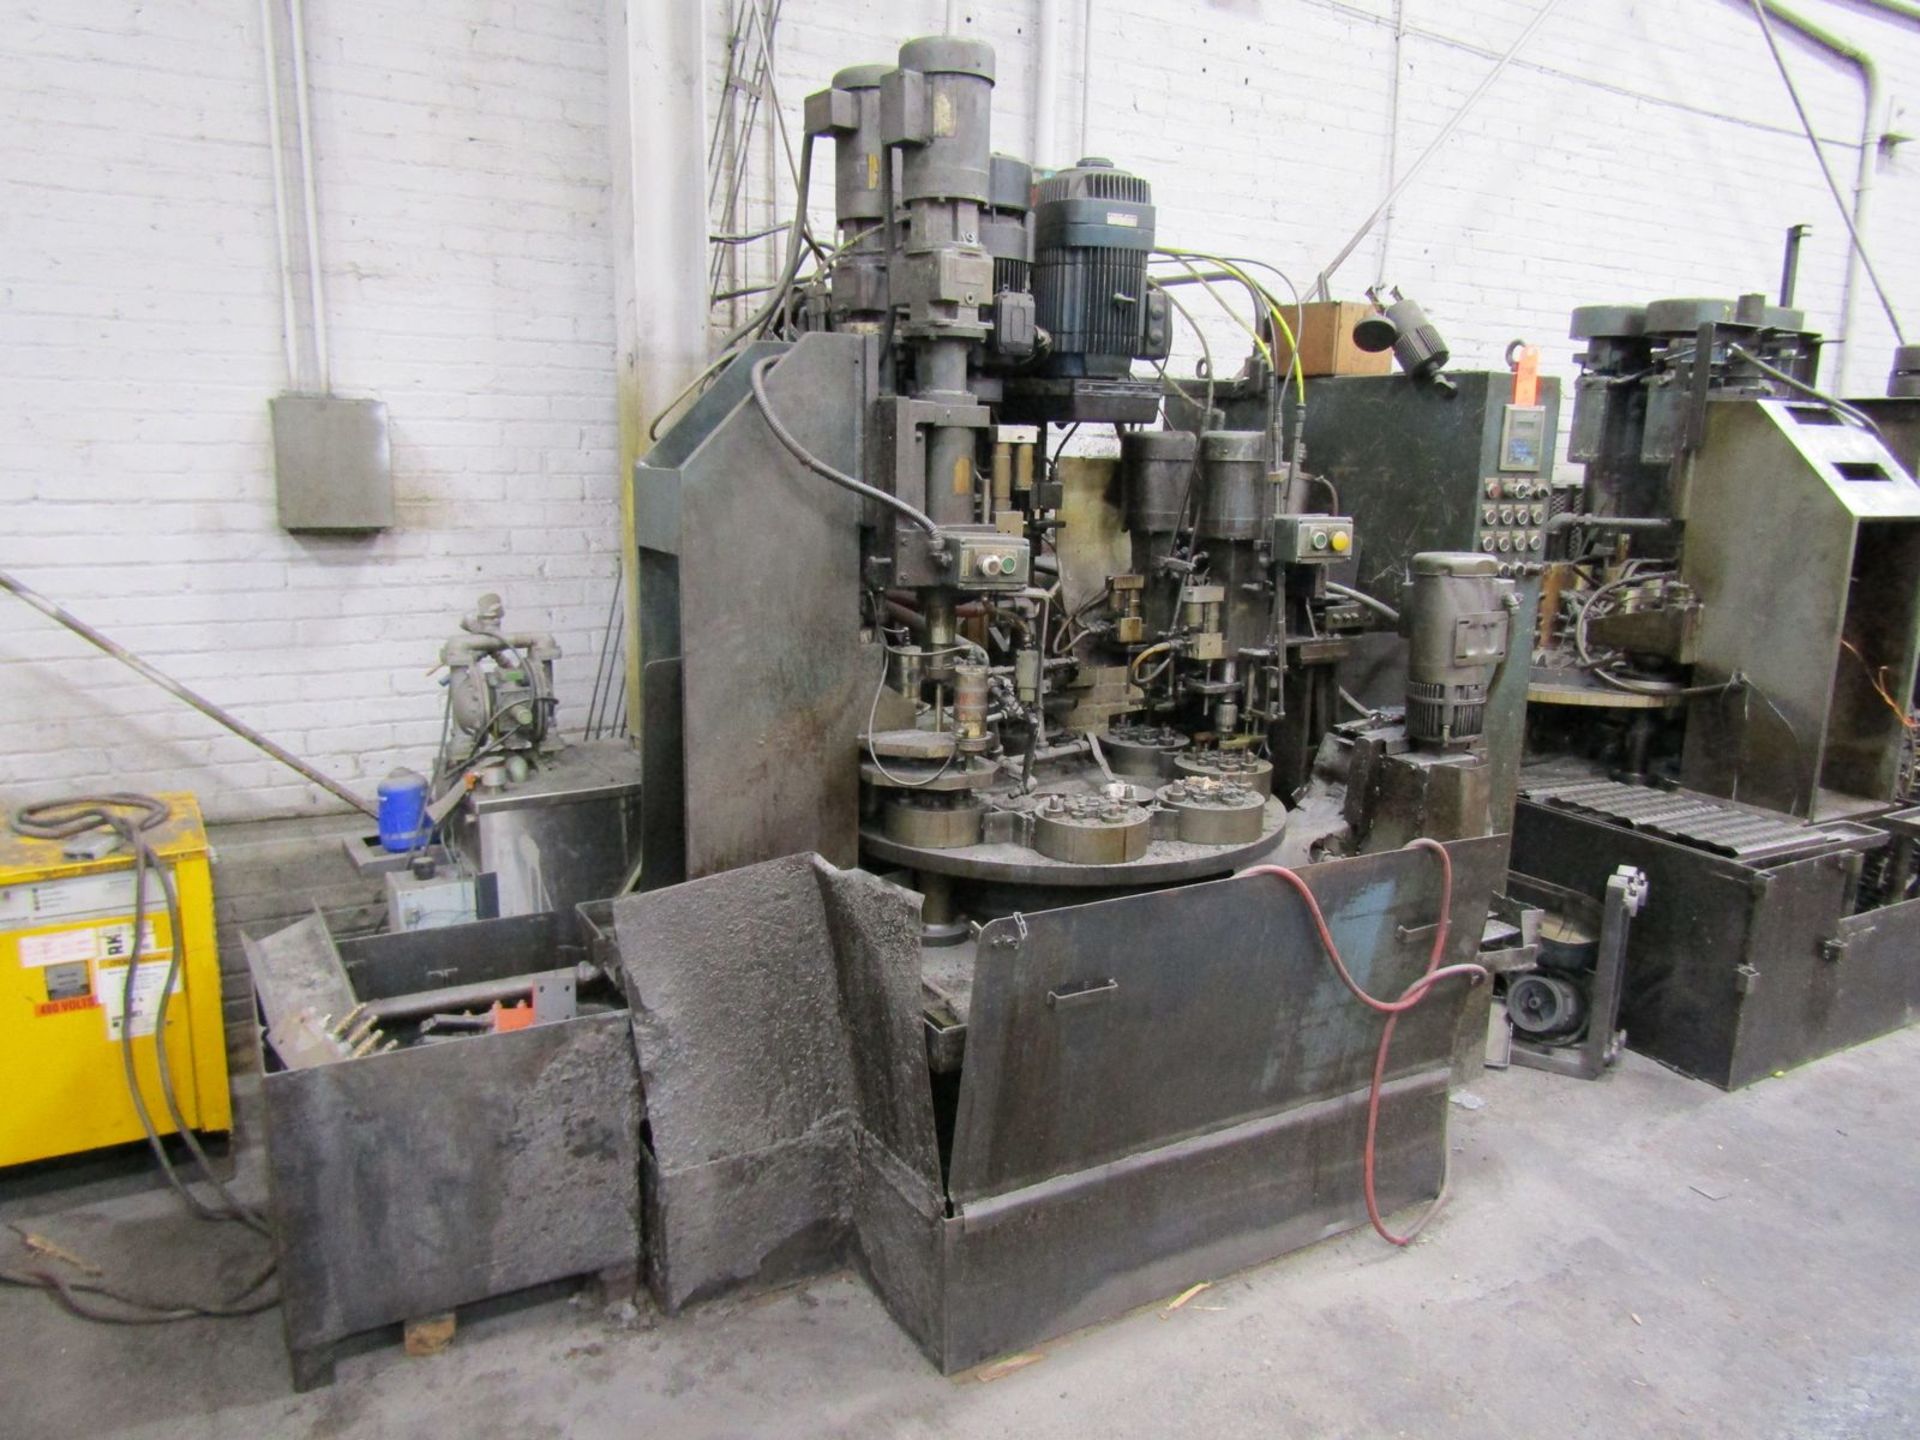 Wisconsin Drill Head "Wis-Matic" 4-Station Rotary Indexing Secondary Operation Drilling & Tapping - Image 2 of 6